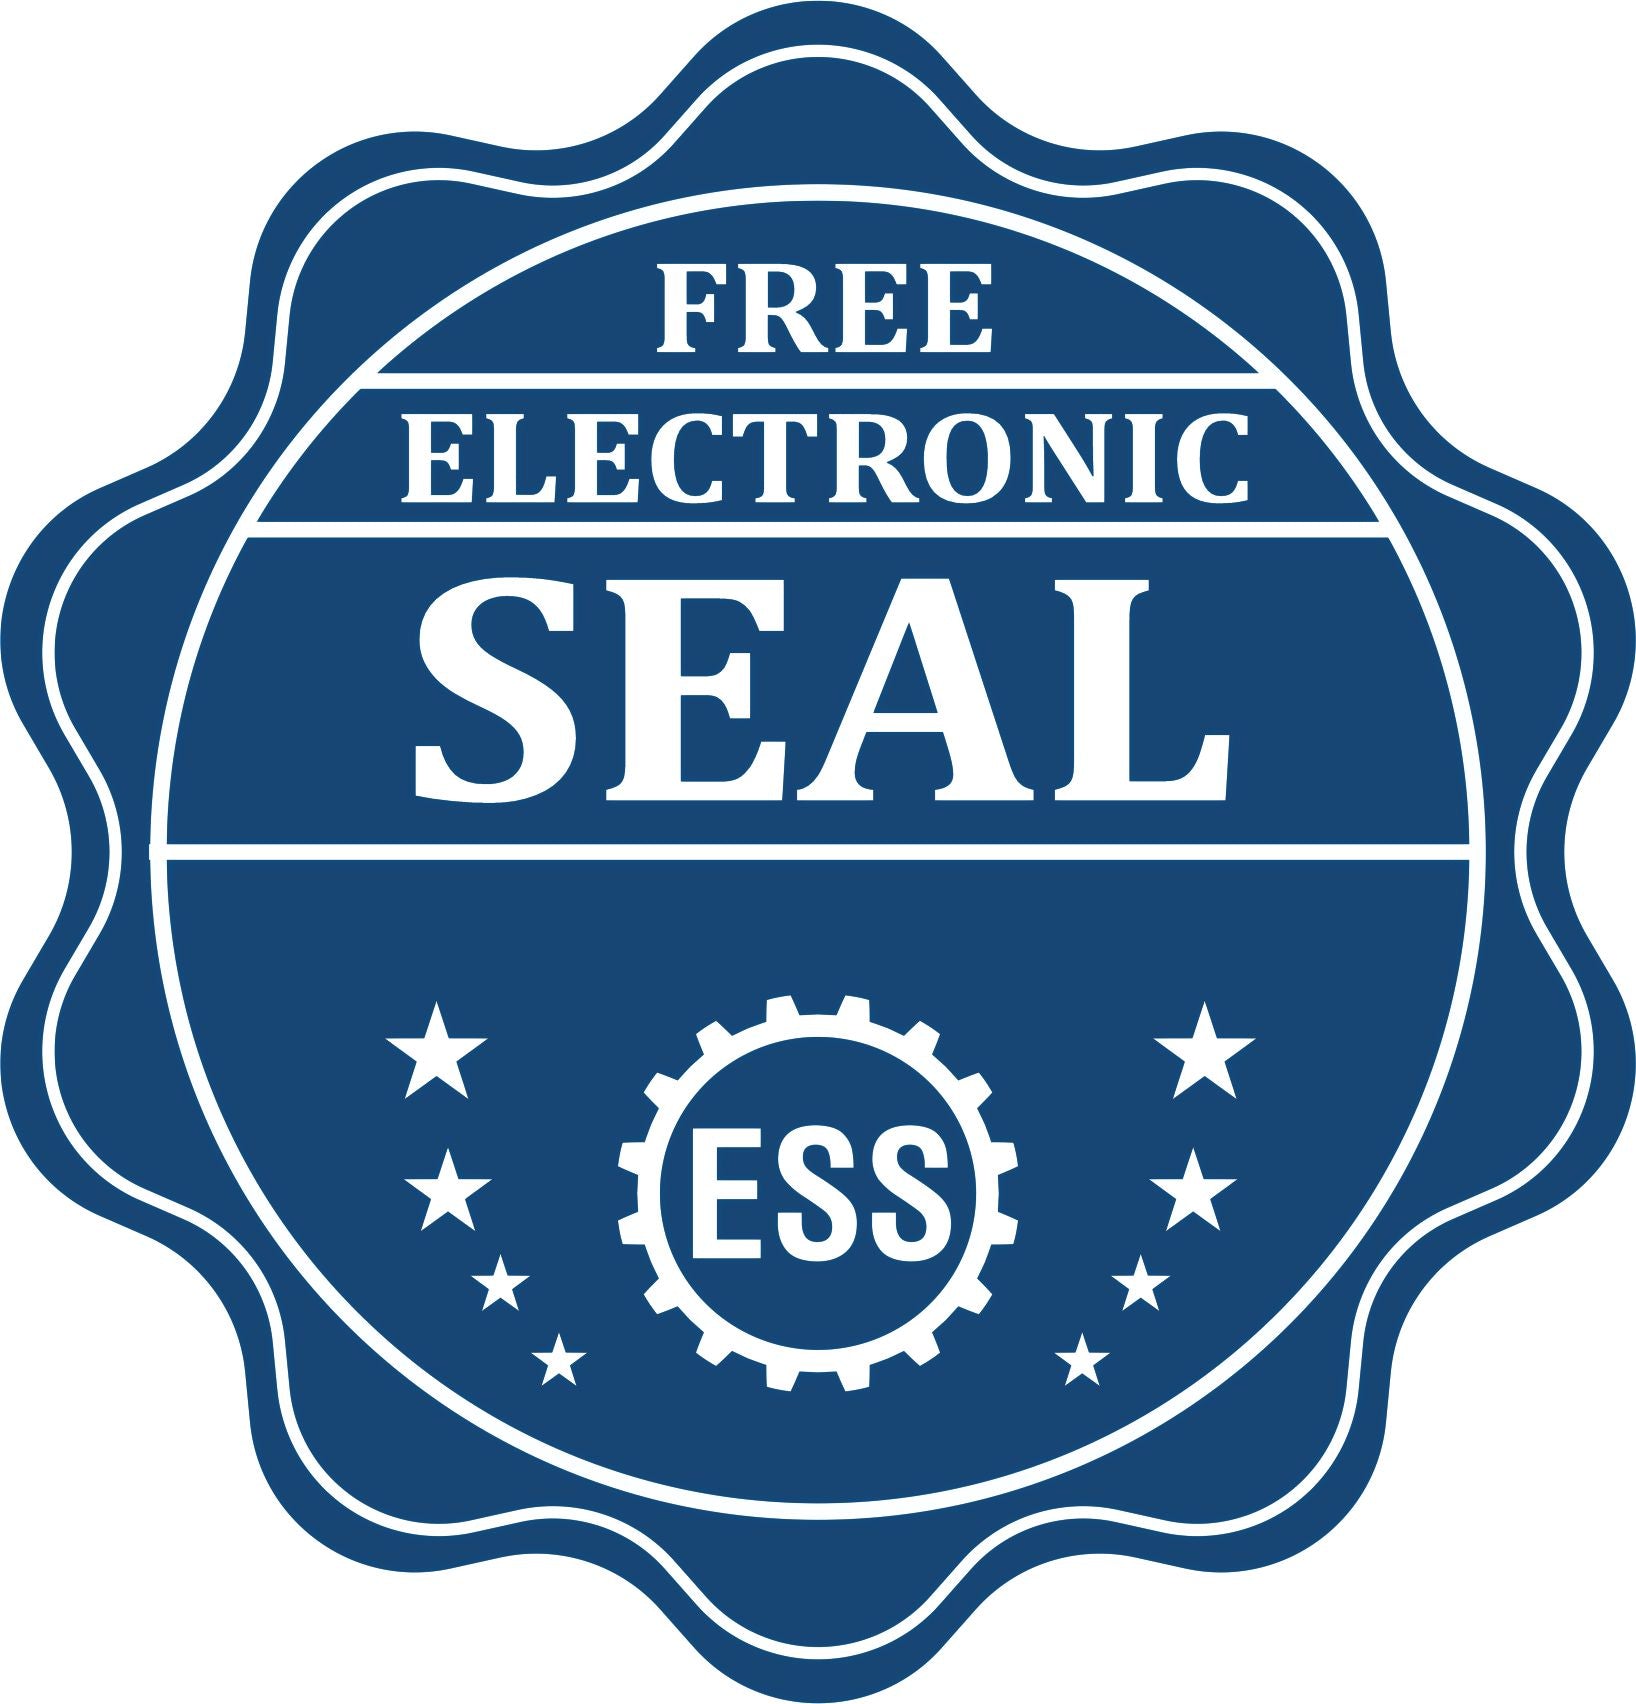 A badge showing a free electronic seal for the PSI Arizona Notary Stamp with stars and the ESS gear on the emblem.